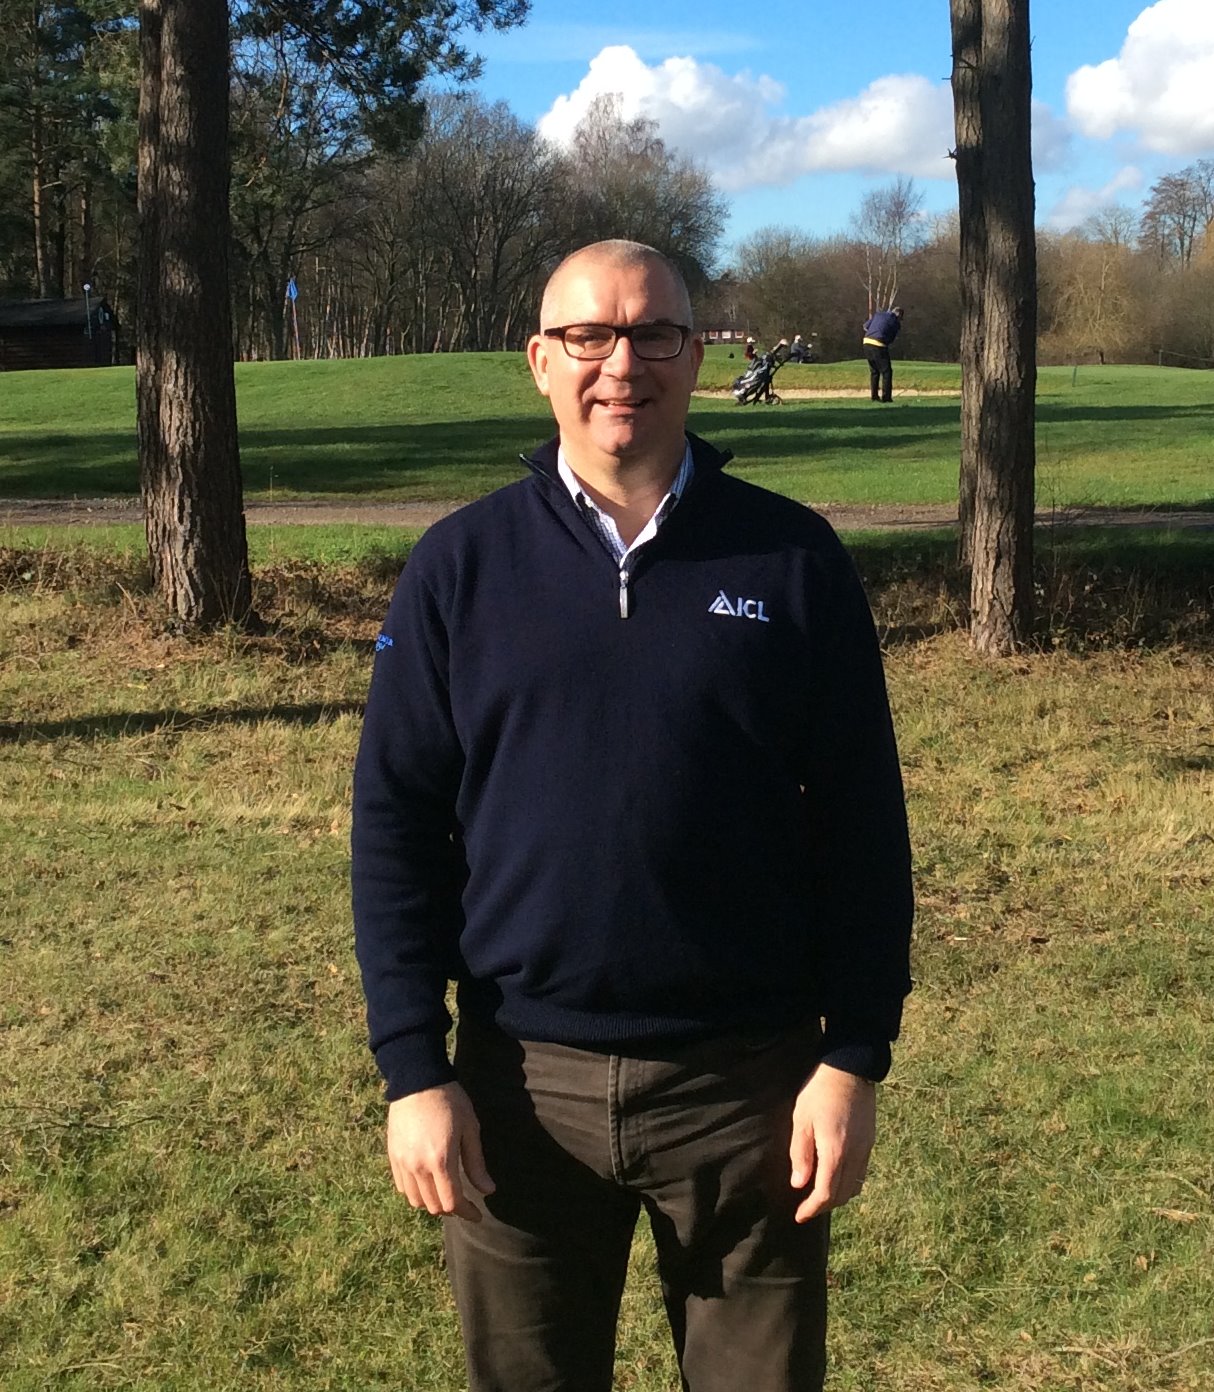 ICL has appointed Darren Hatcher as a Technical Area Sales Manager